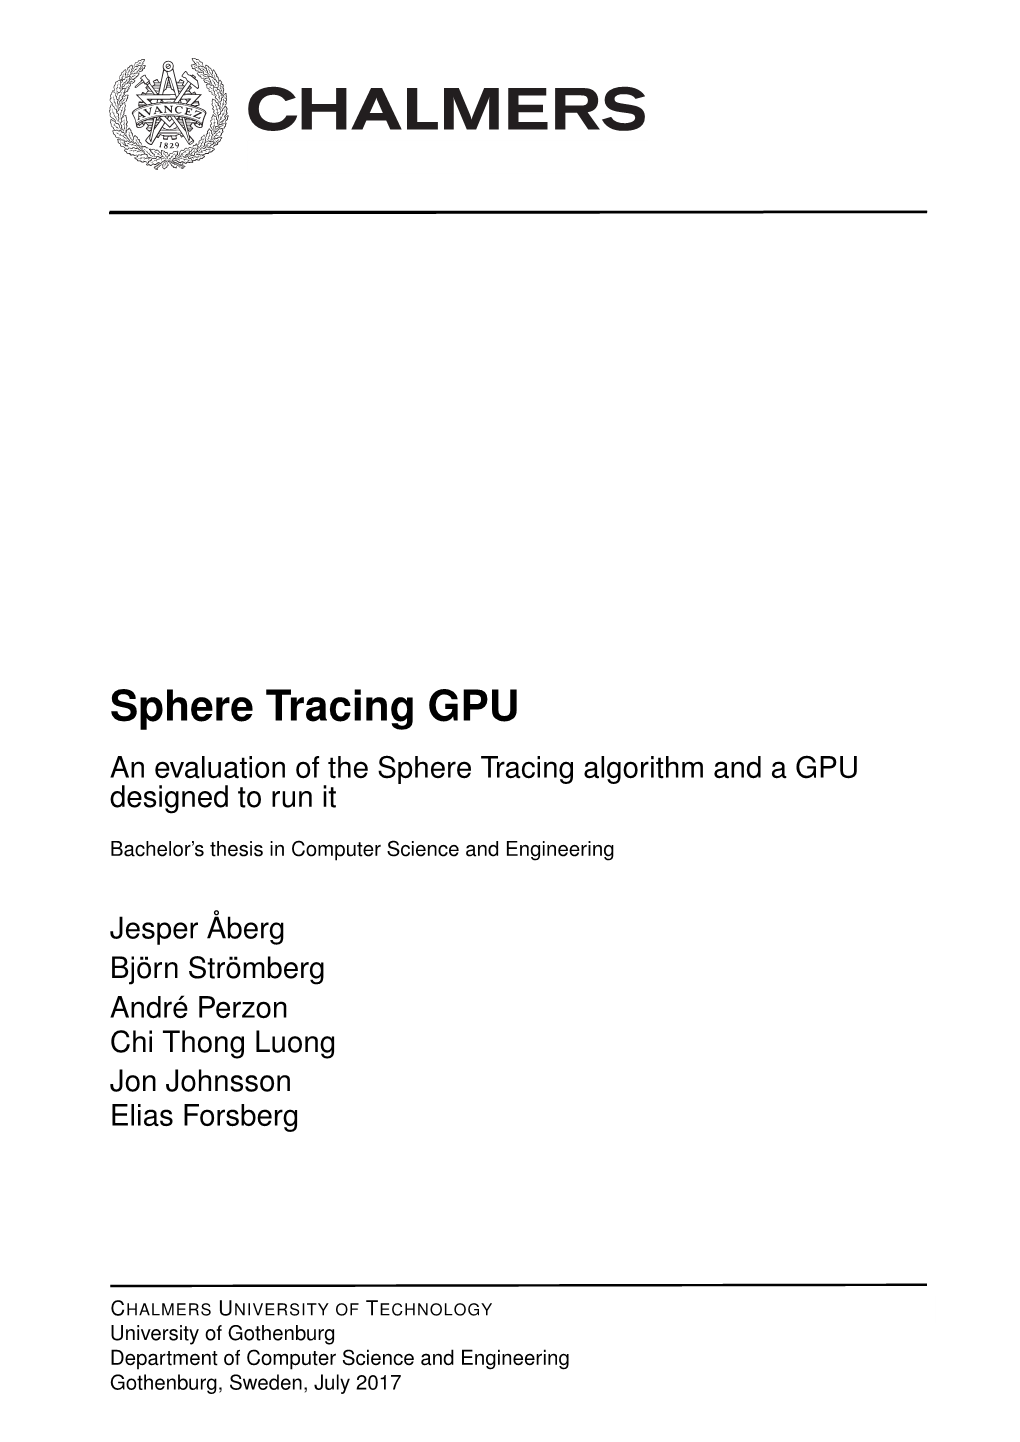 Sphere Tracing GPU an Evaluation of the Sphere Tracing Algorithm and a GPU Designed to Run It